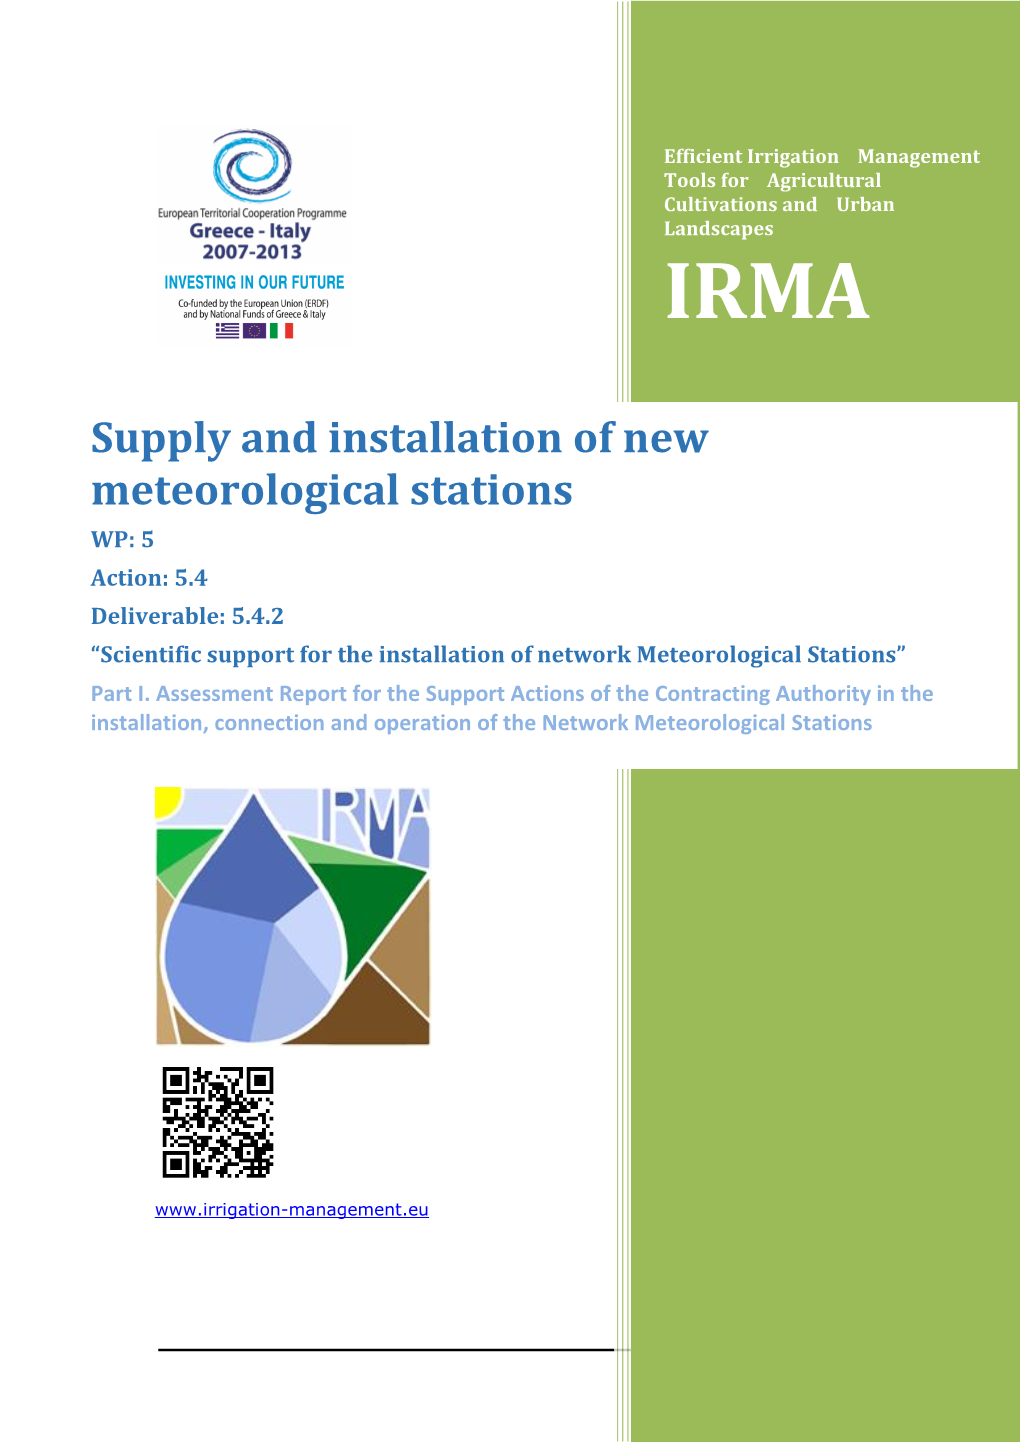 Supply and Installation of New Meteorological Stations